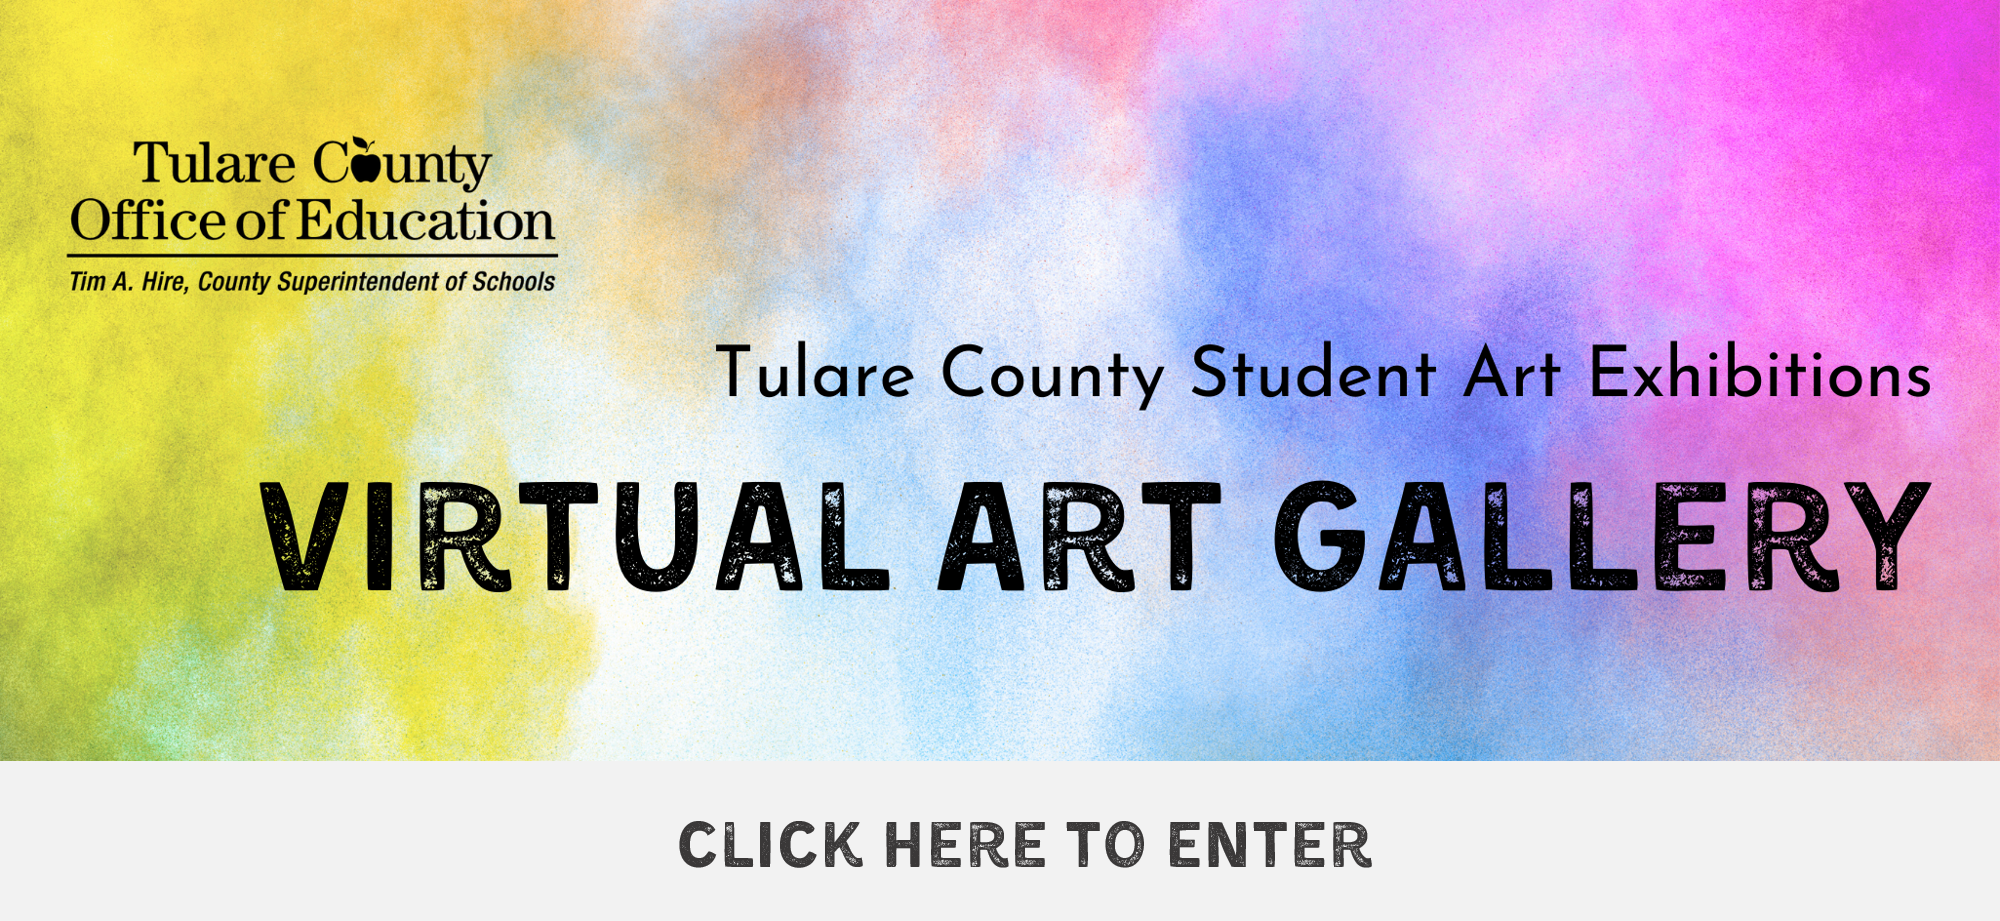 Tulare County Student Art Exhibitions Virtual Art Gallery Click to Enter